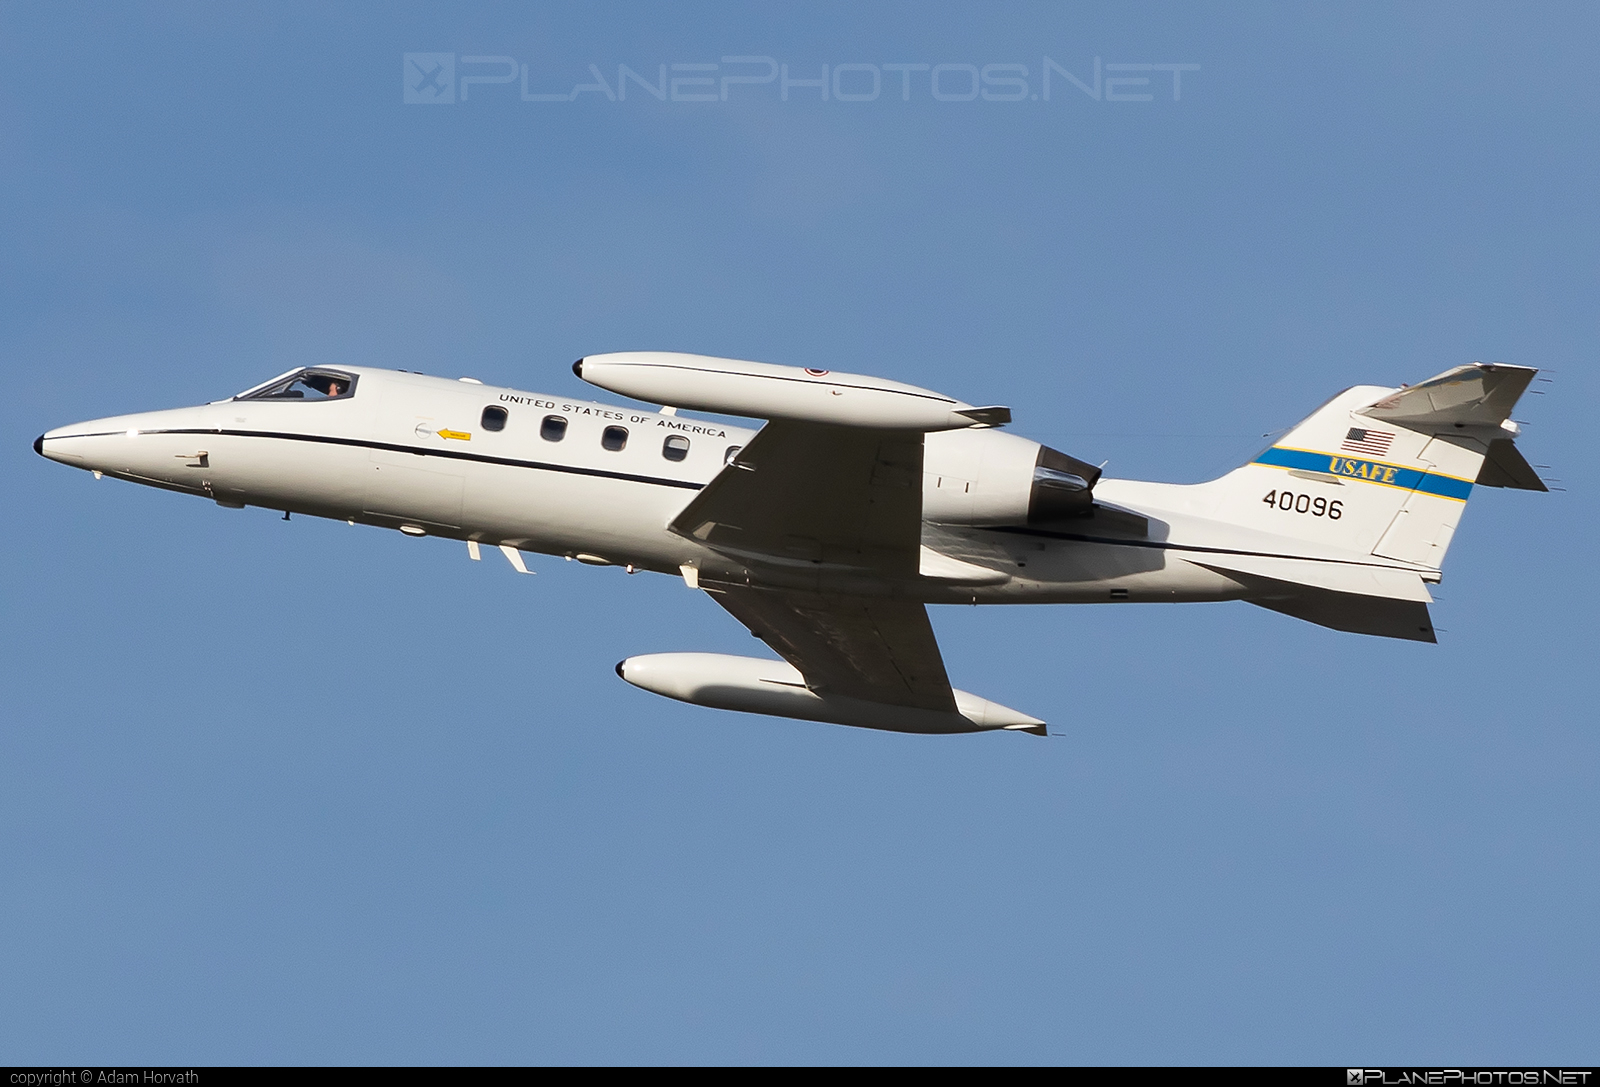 Gates Learjet C-21A - 84-0096 operated by US Air Force (USAF) #c21a #gateslearjet #learjet #learjet35 #learjetc21a #usaf #usairforce